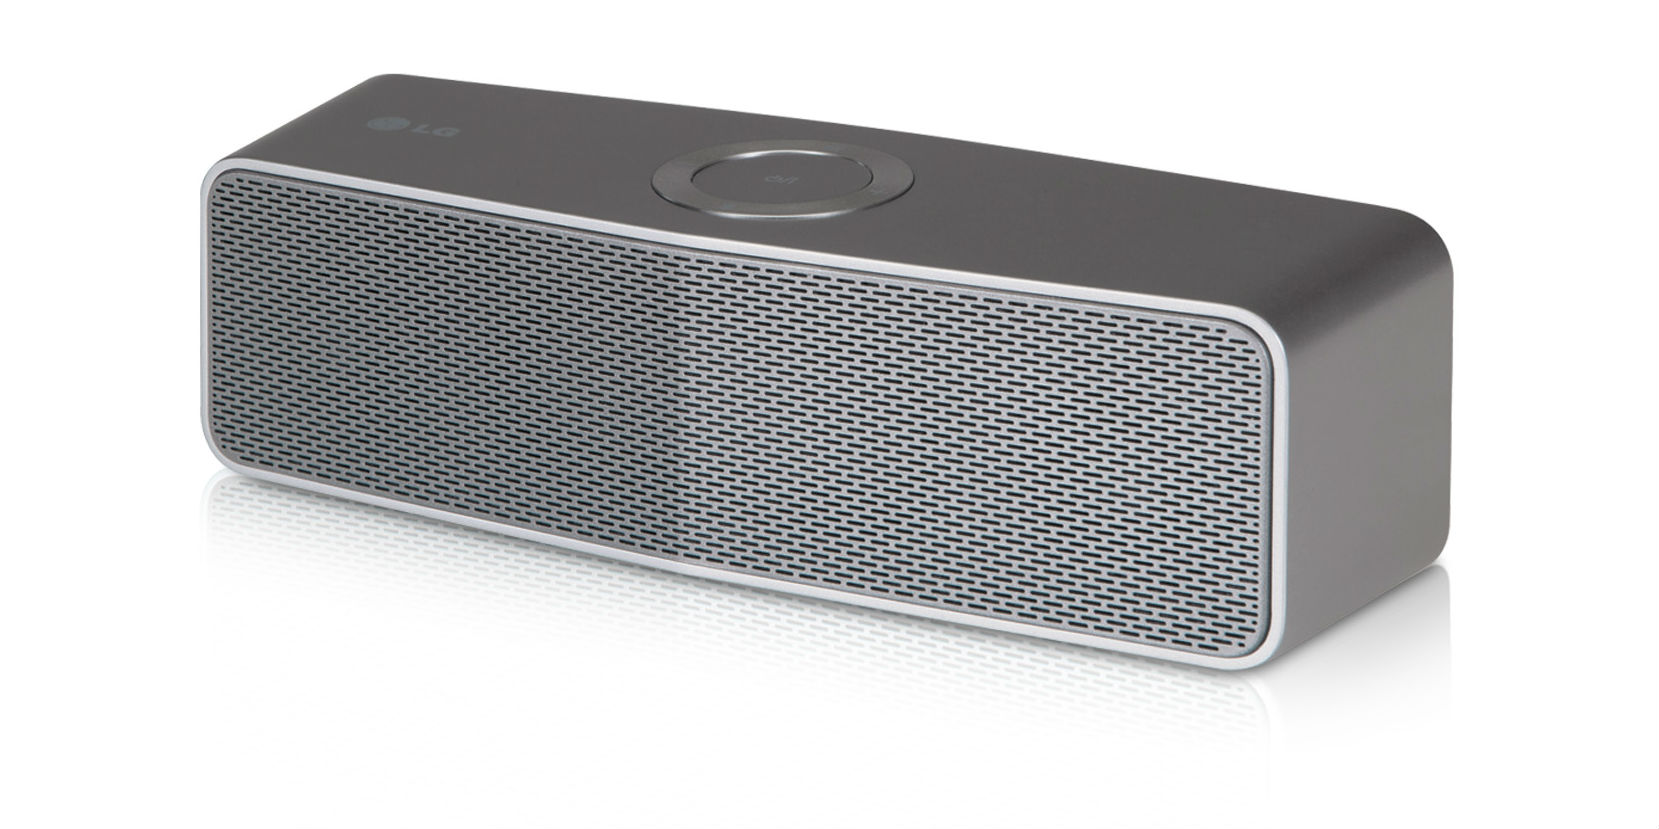 LG’s Music Flow Adds A Few Extra Speakers